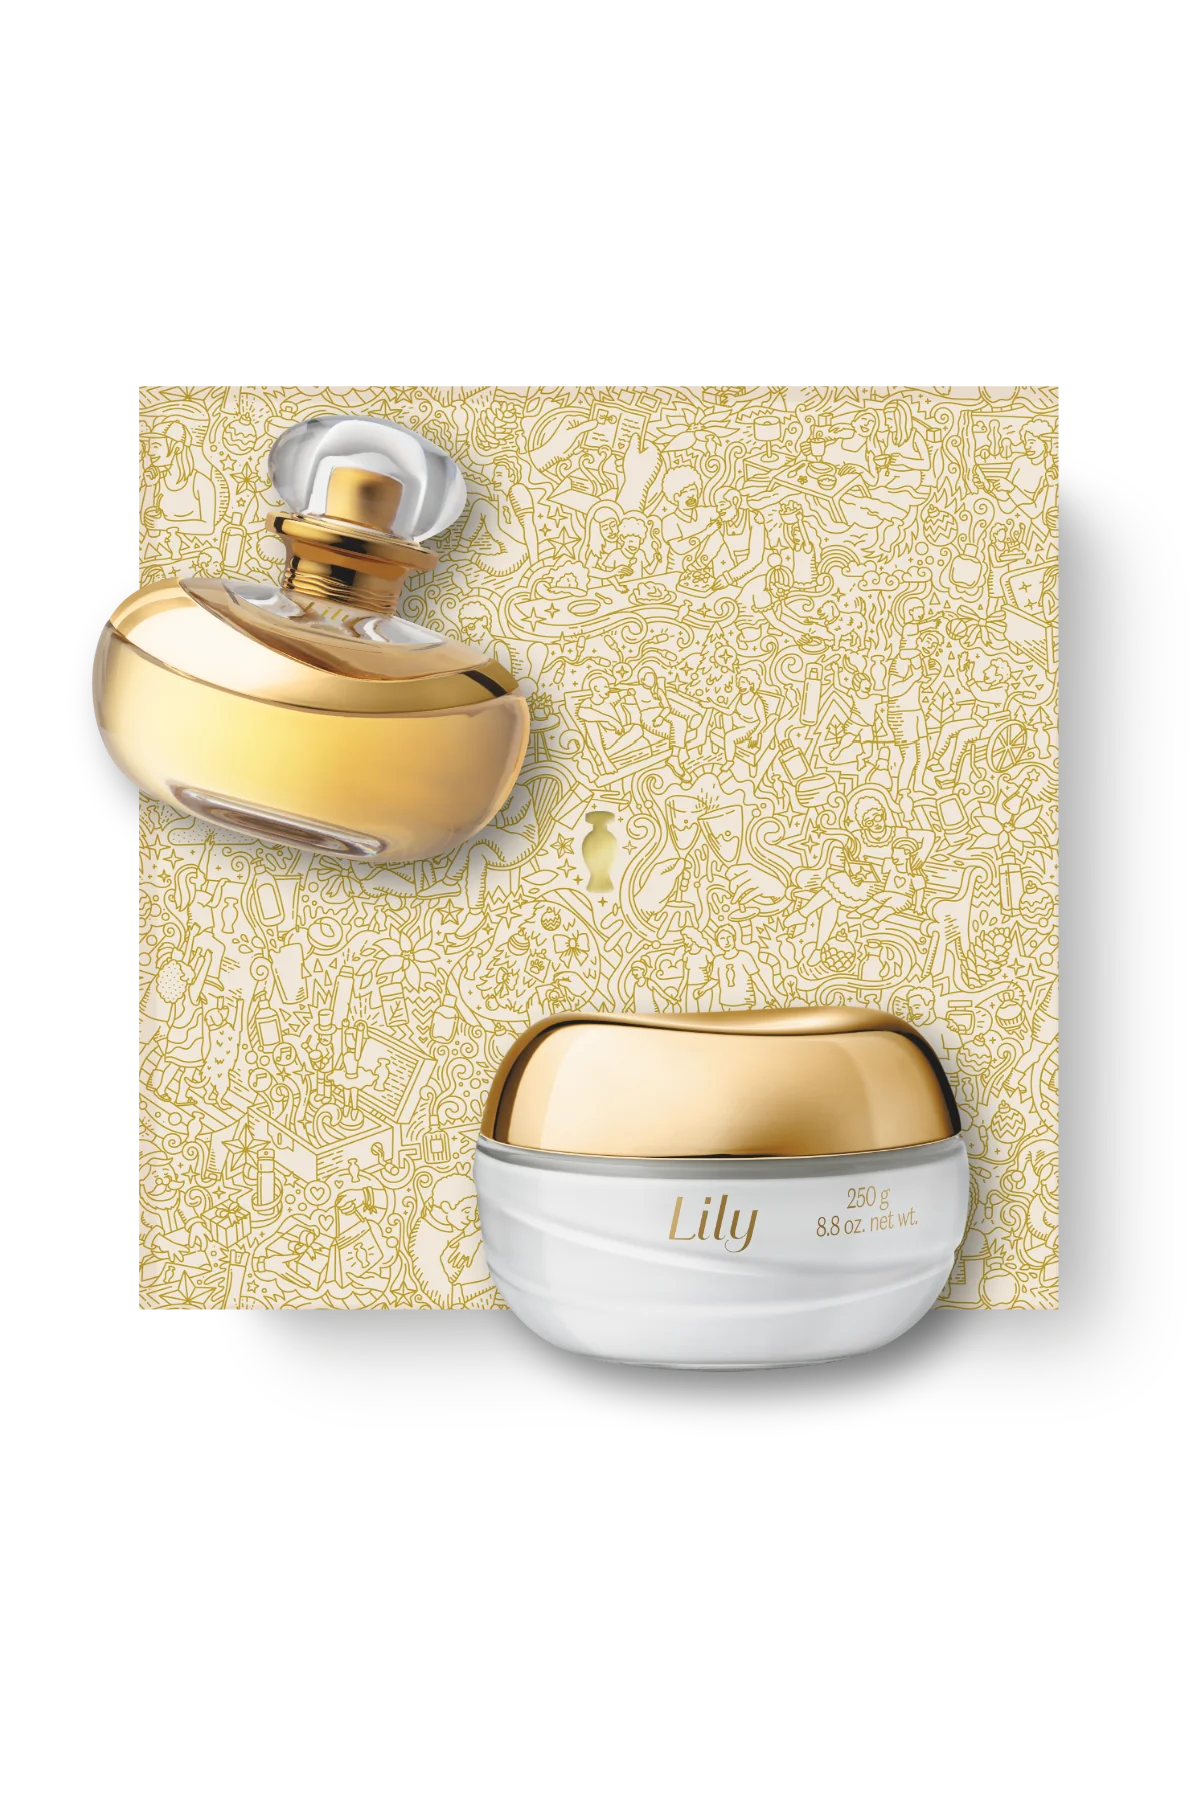 Lily Duo Holiday Gift Set: 75ml Fragrance, 250g Satin Cream